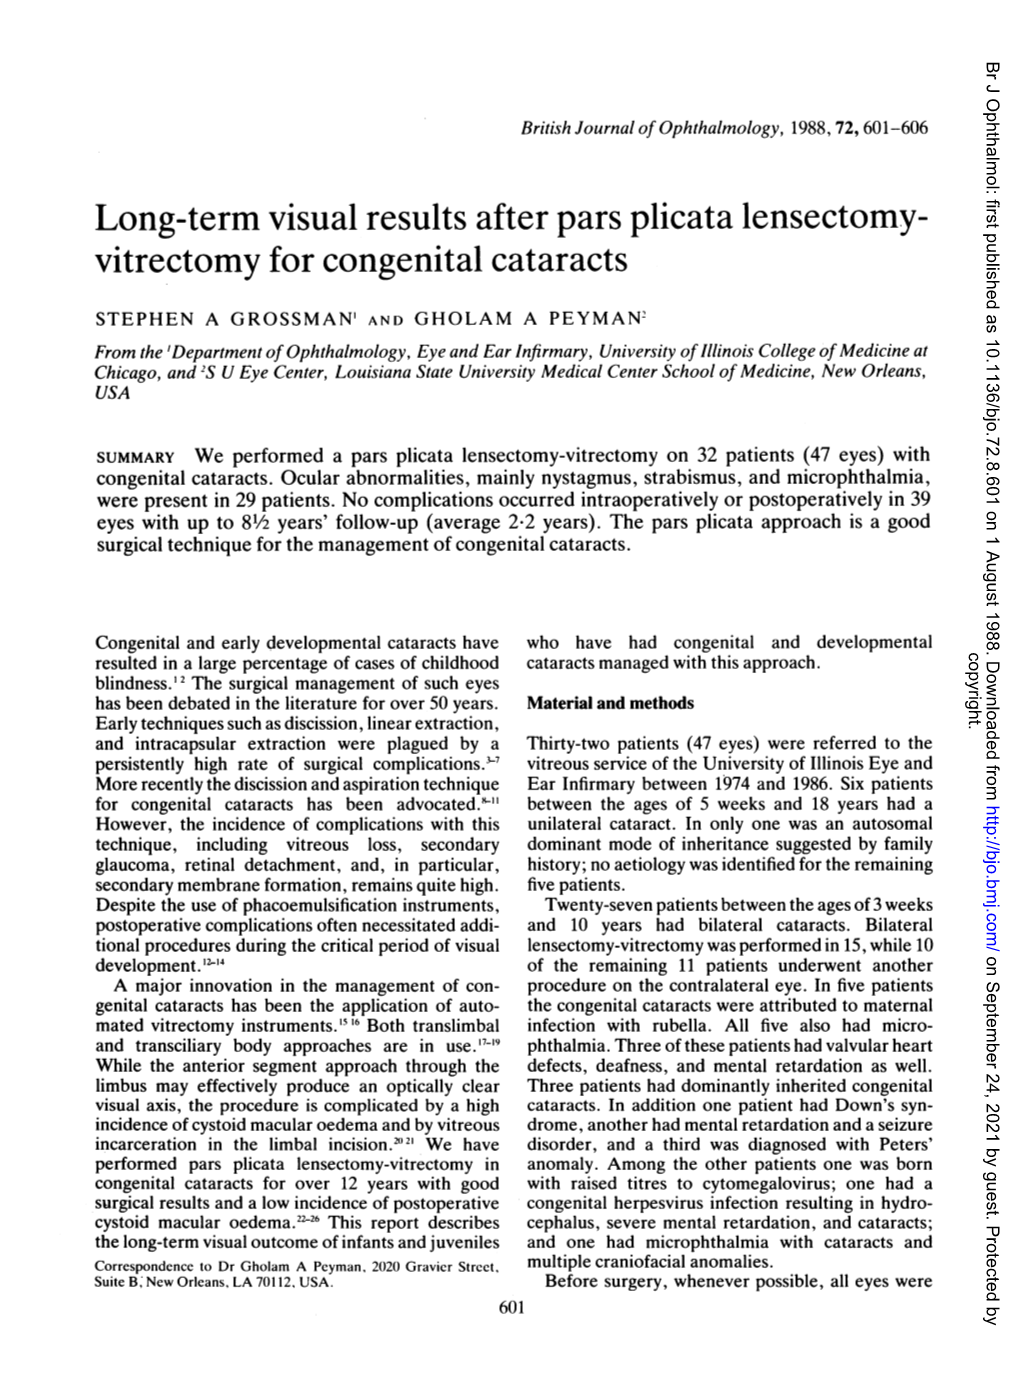 Long-Term Visual Results After Pars Plicata Lensectomy- Vitrectomy for Congenital Cataracts